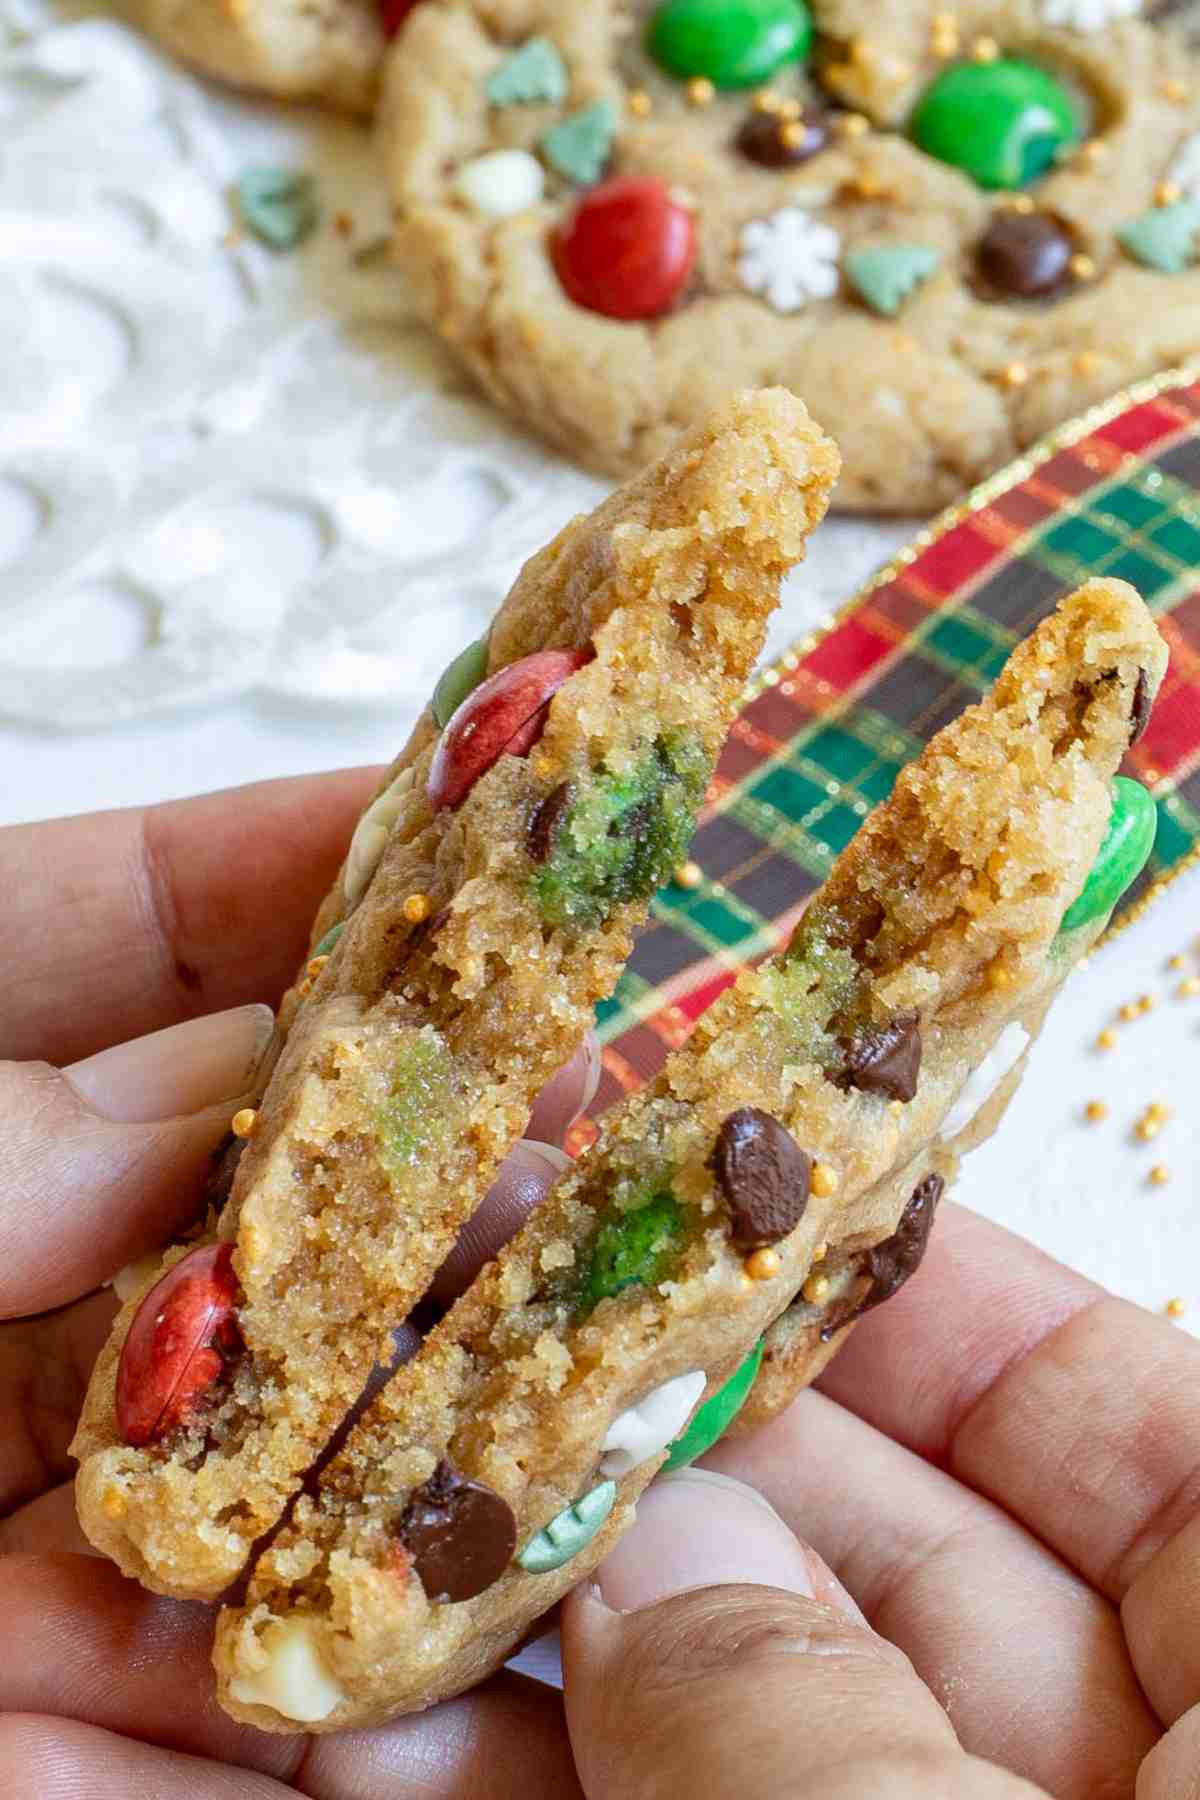 A hand is breaking a light brown cookie with red and green m&ms, chocolate chips, tiny white sugar snowflakes, and tiny green pine trees in half to show the inner texture. More cookies are in the background.